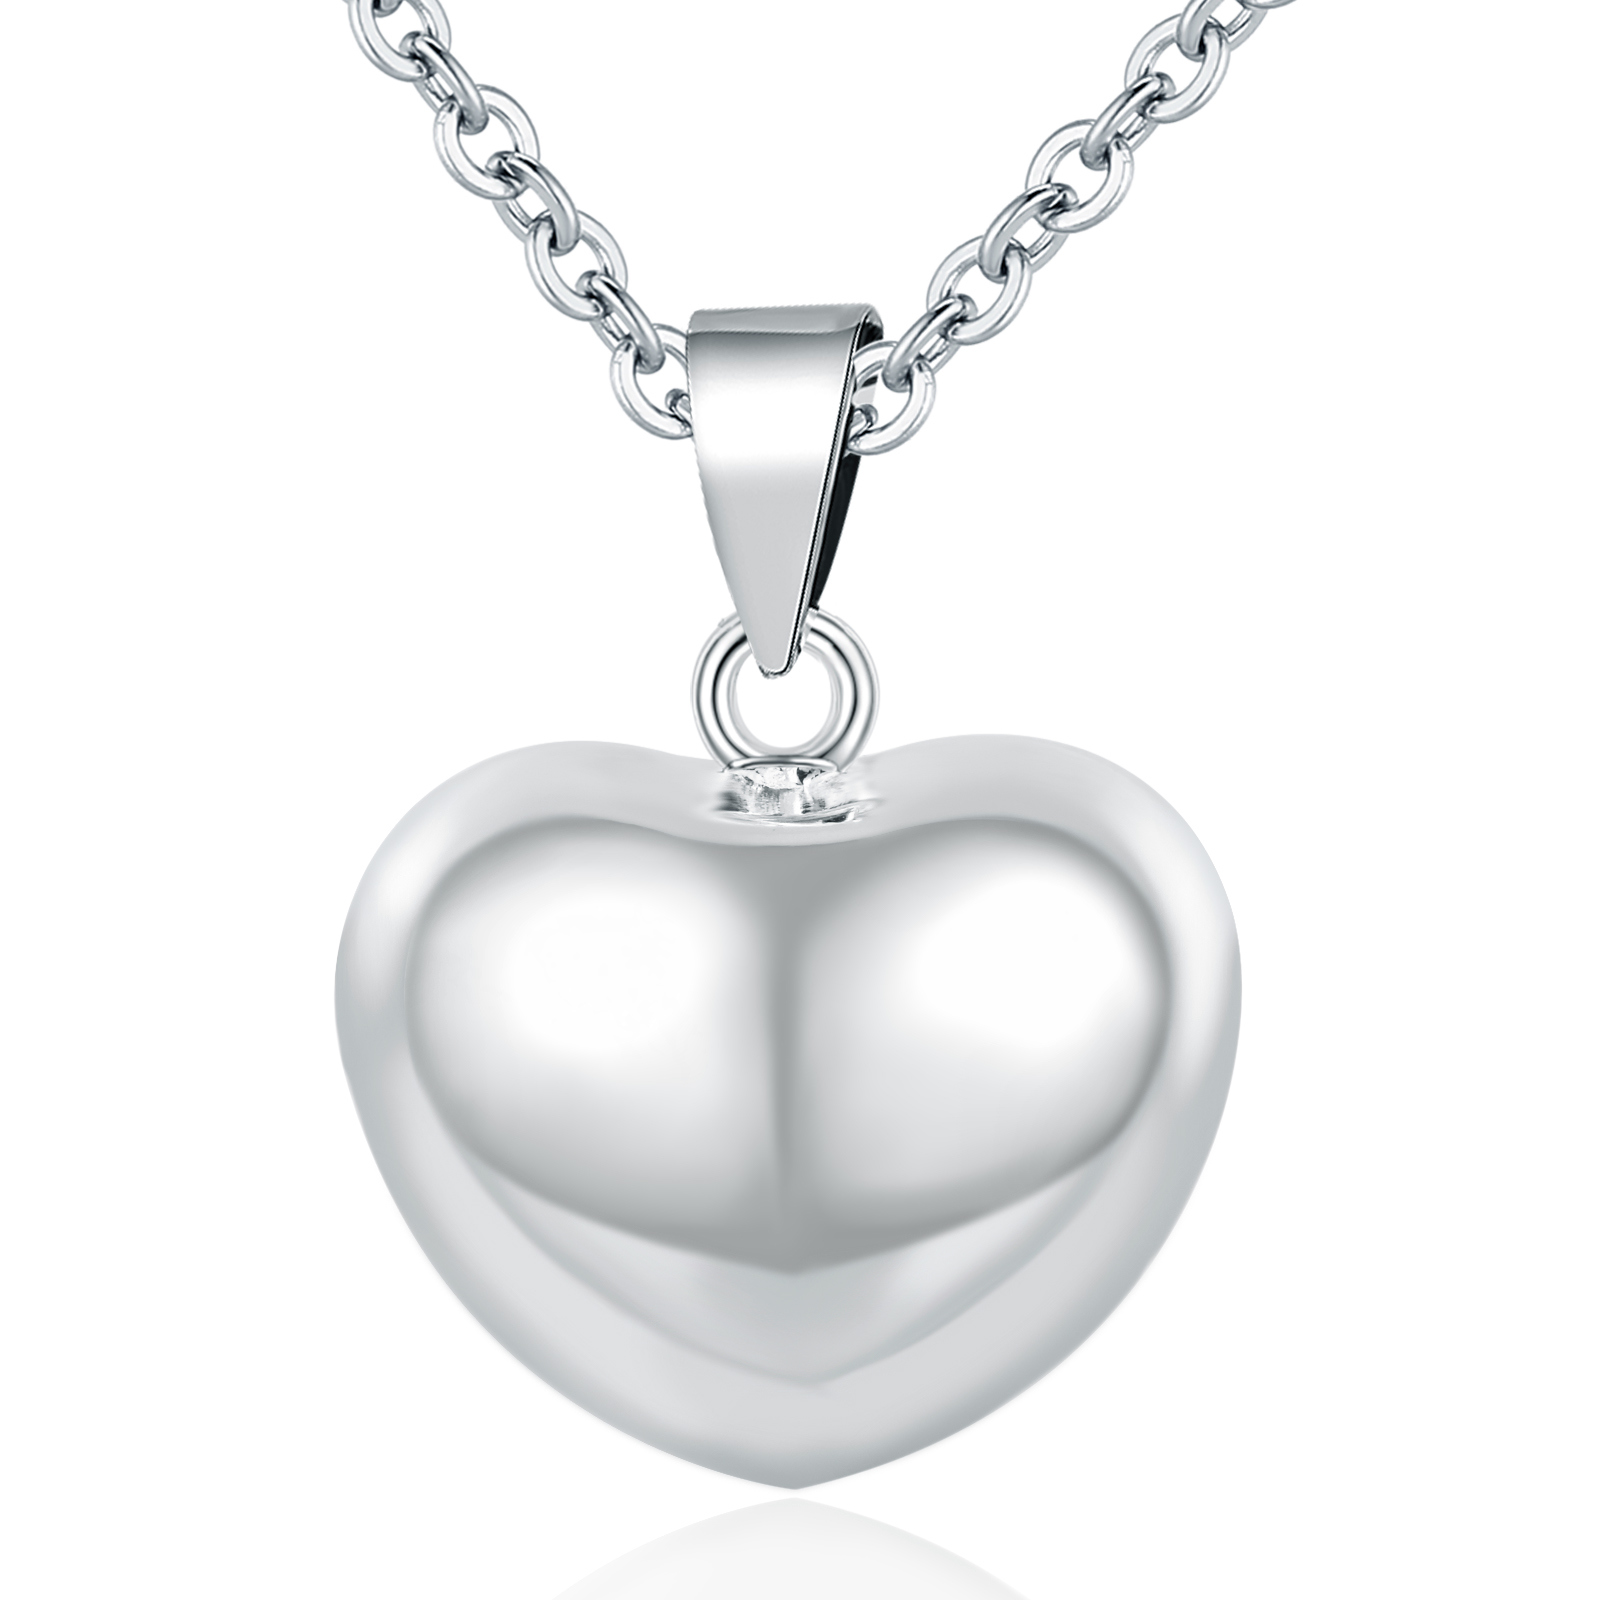 Merryshine Jewelry S925 Sterling Silver Mexican Bola Cute Heart Harmony Ball Necklace